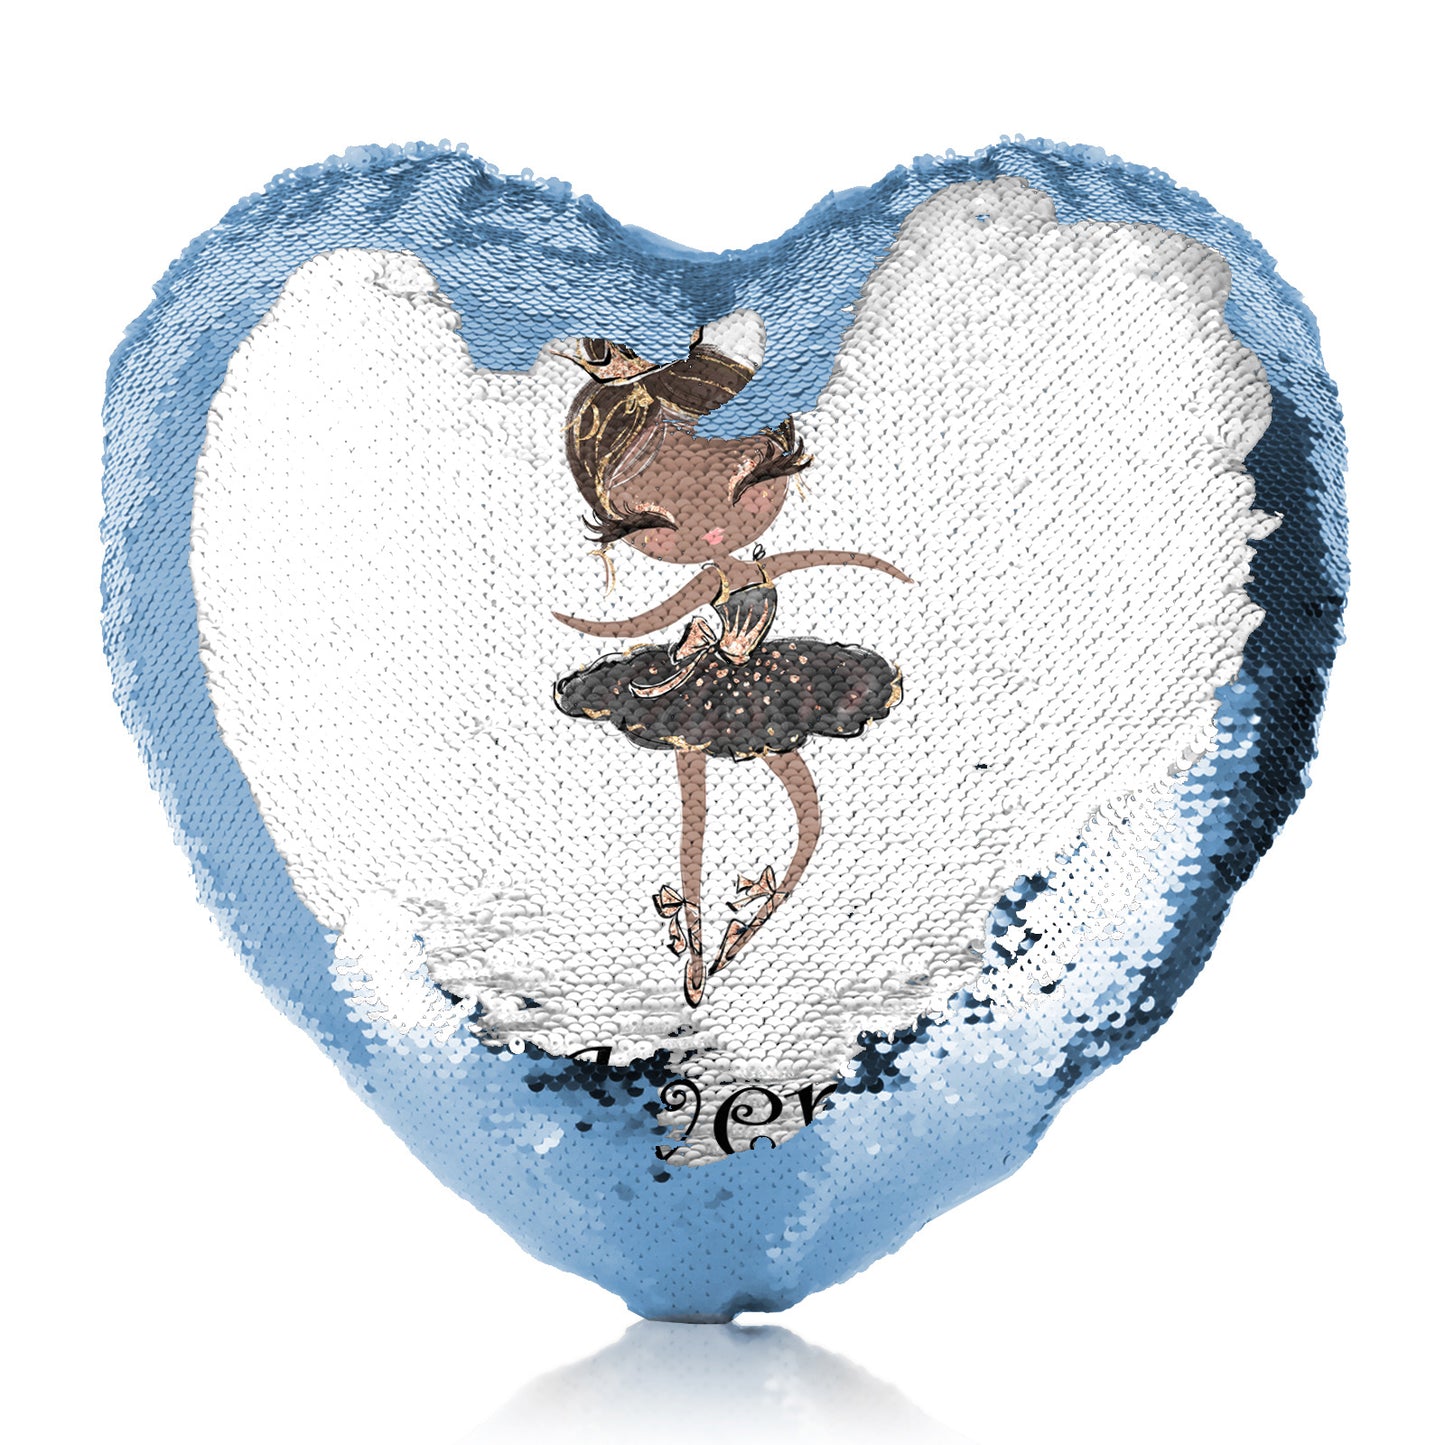 Personalised Sequin Heart Cushion with Cute Text and Black Hair Black Dress Tiara Ballerina